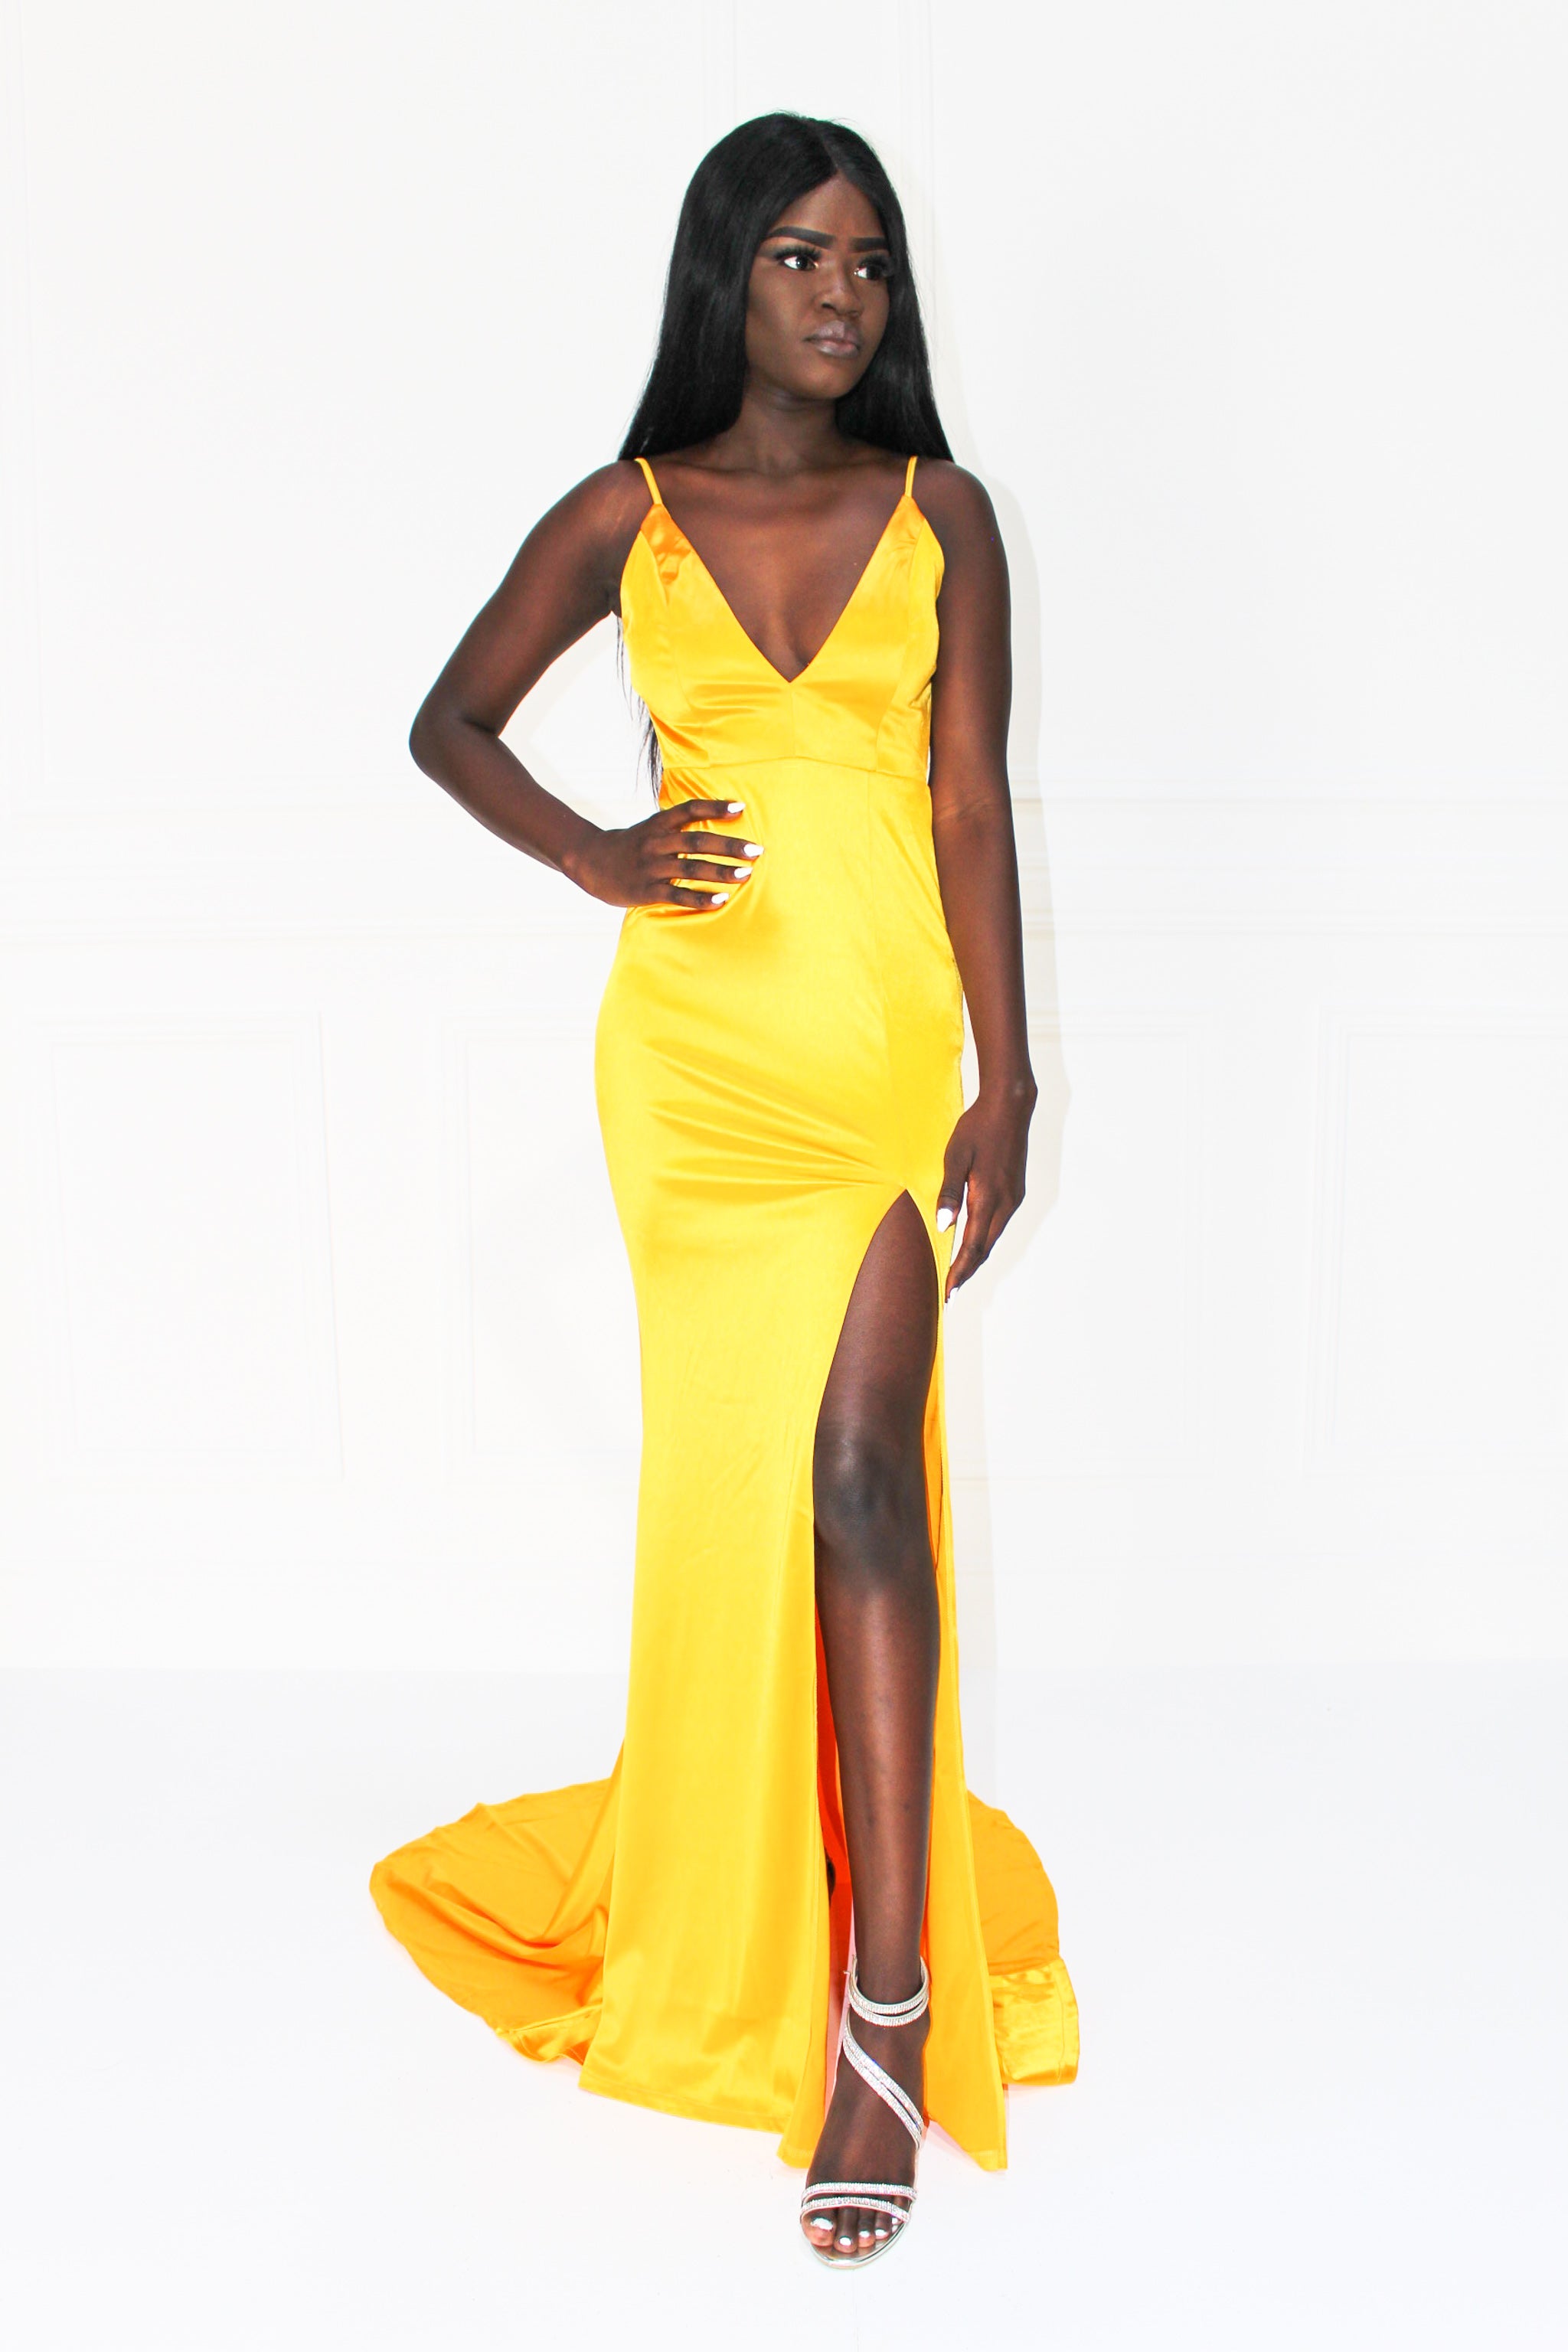 Honey Couture MILEE Yellow Low Back Mermaid Evening Gown Dress Honey Couture$ AfterPay Humm ZipPay LayBuy Sezzle